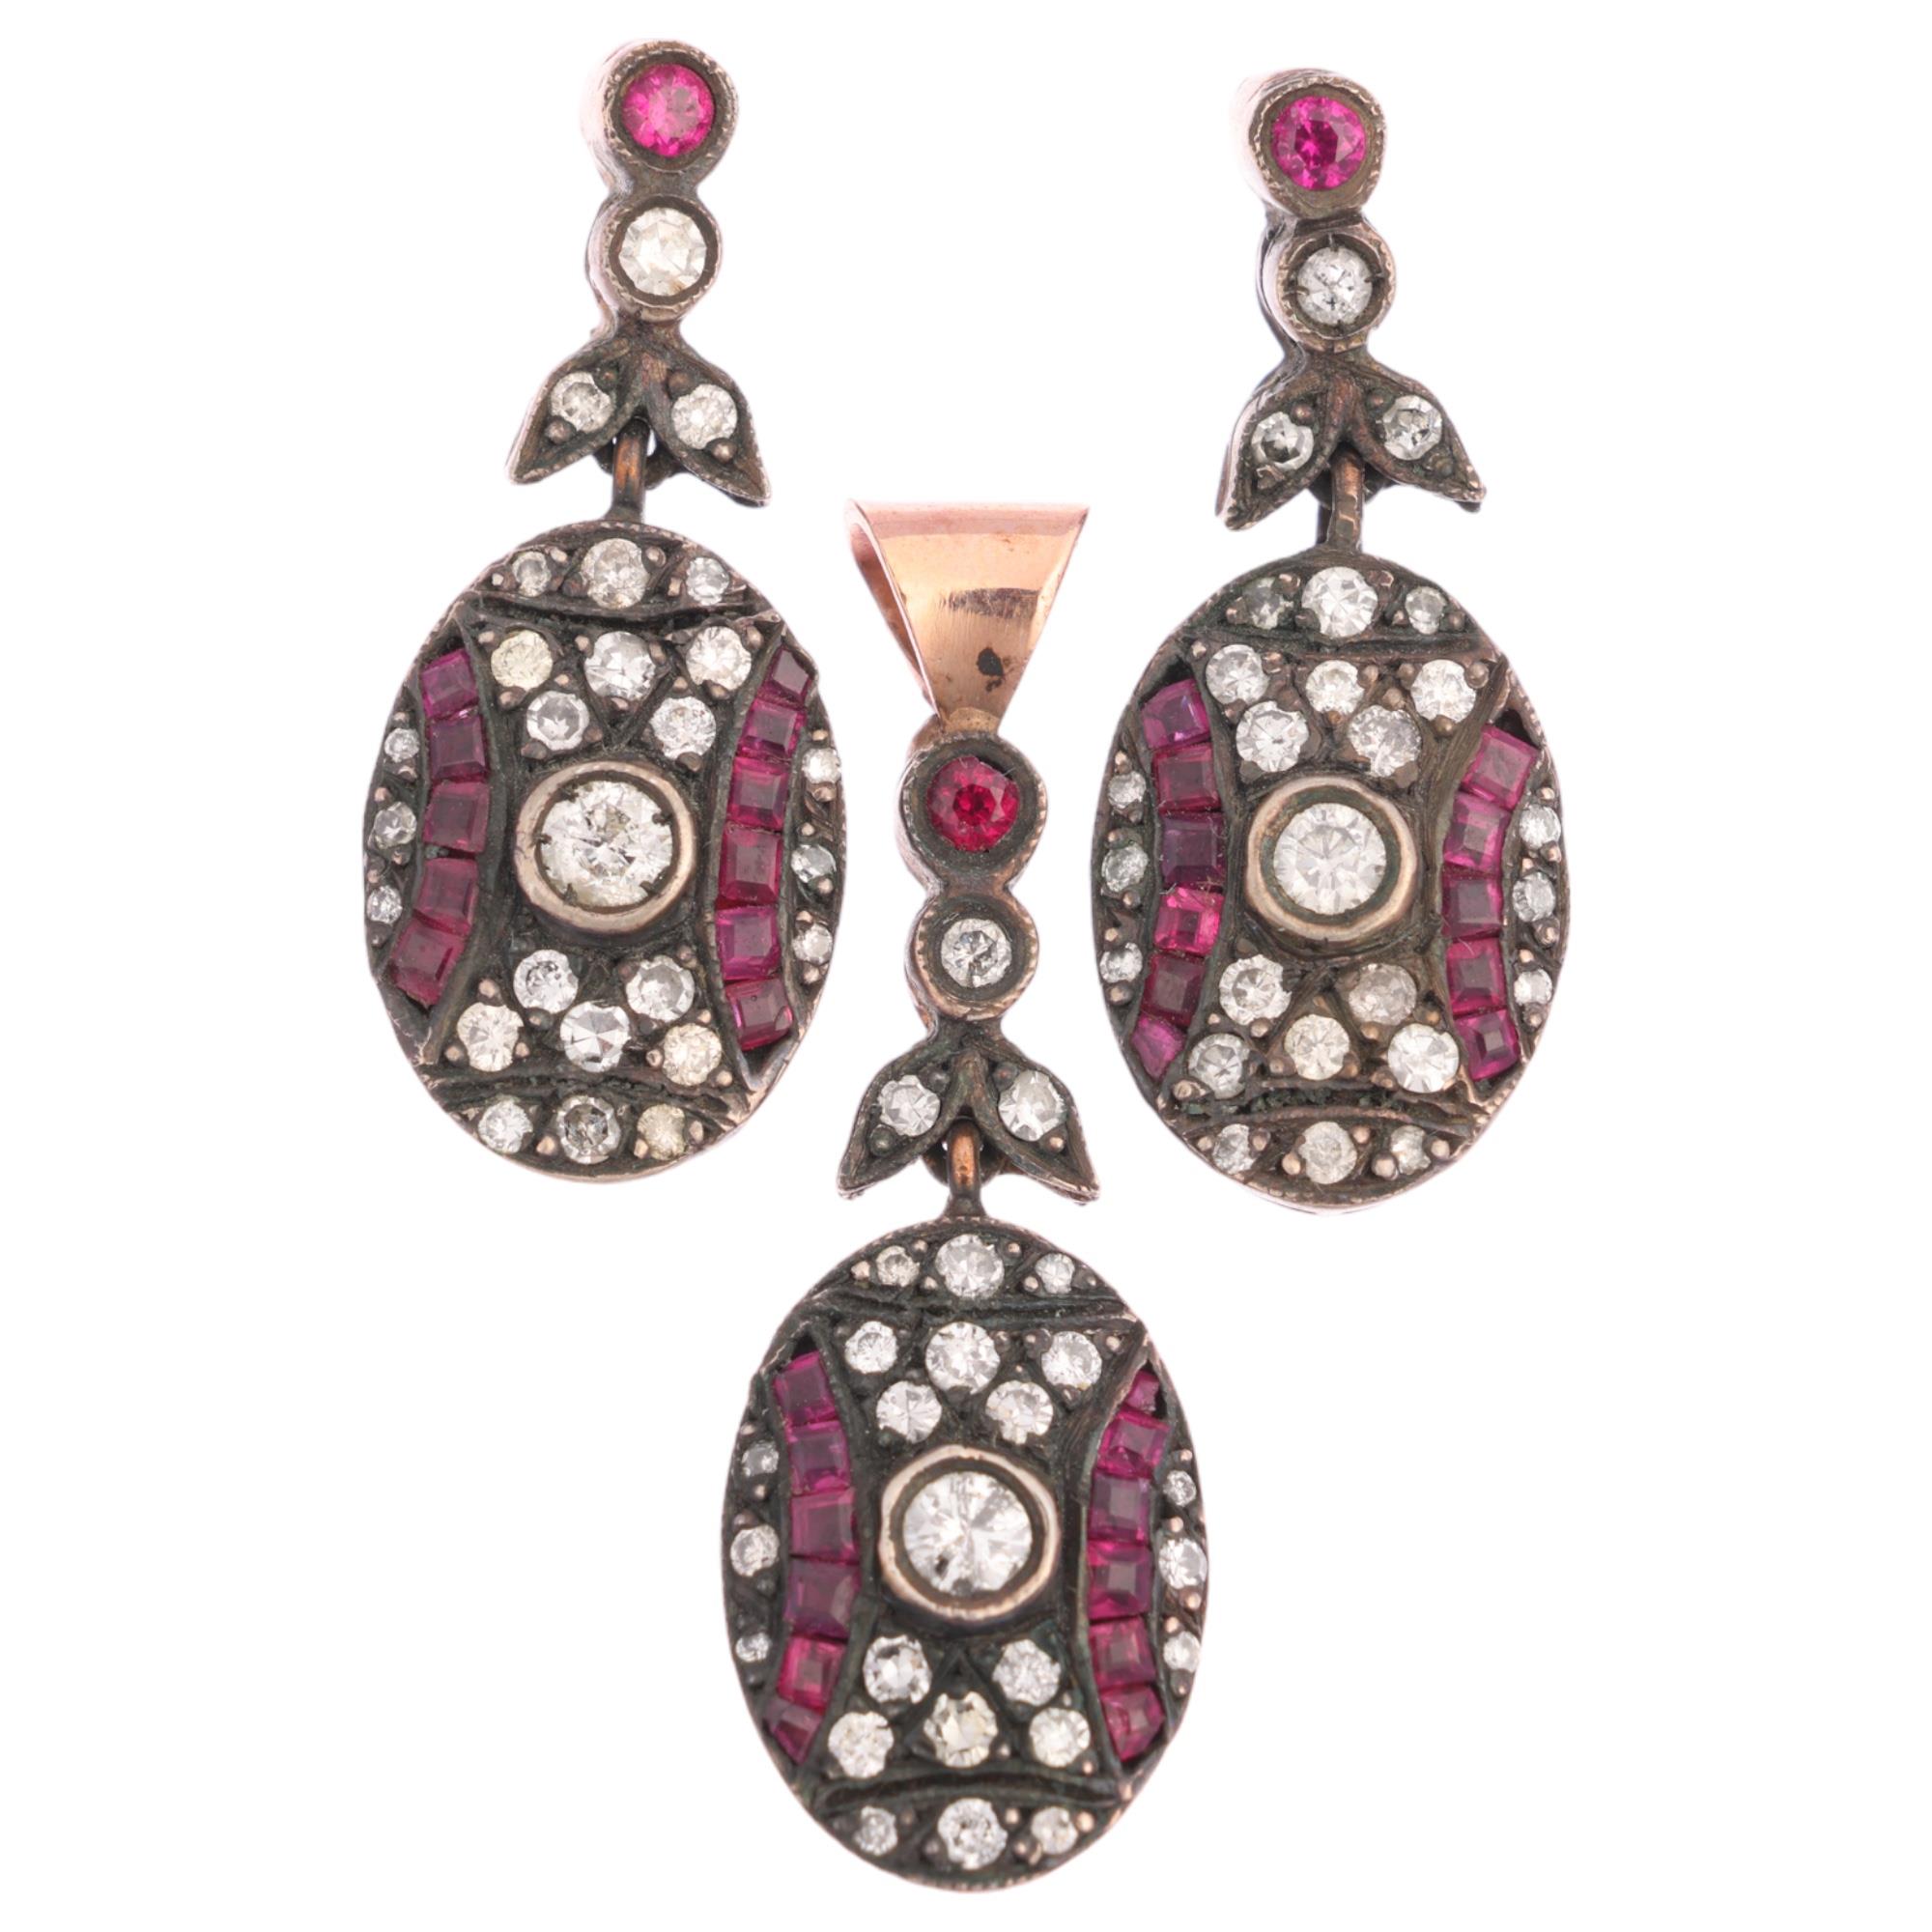 A modern ruby and diamond geometric panel pendant and earring set, in the Art Deco style, set with